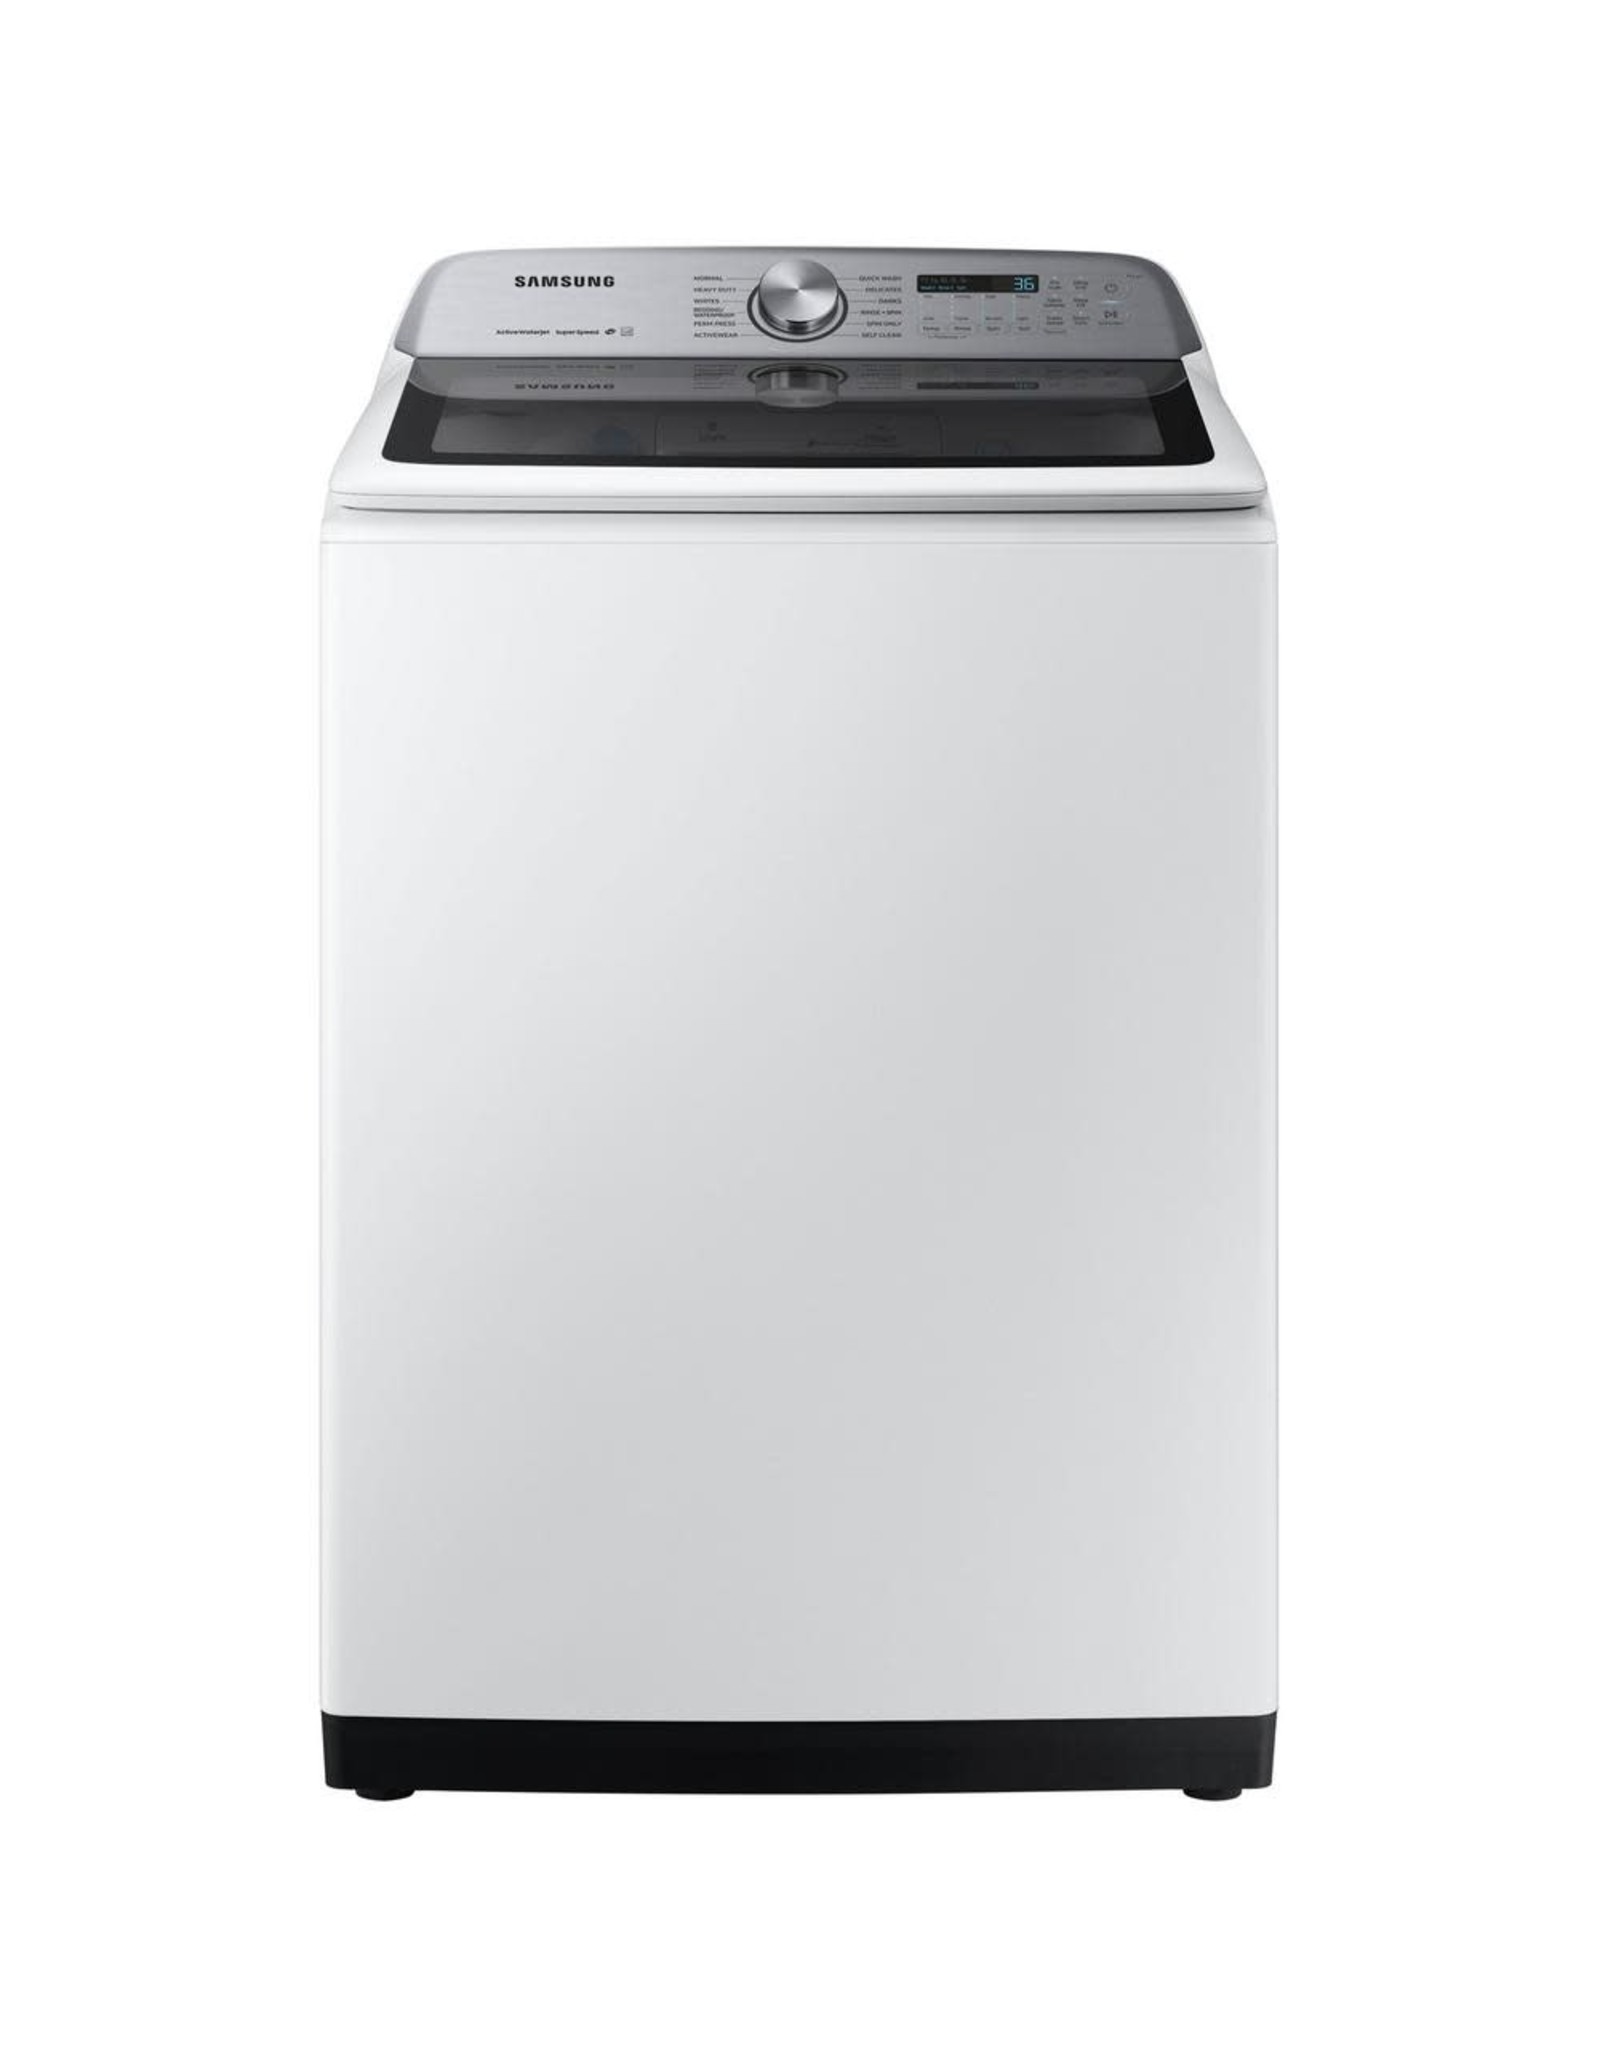 SAMSUNG WA50R5400AW 5.0 cu. ft. High-Efficiency in White Top Load Washing Machine with Super Speed, ENERGY STAR